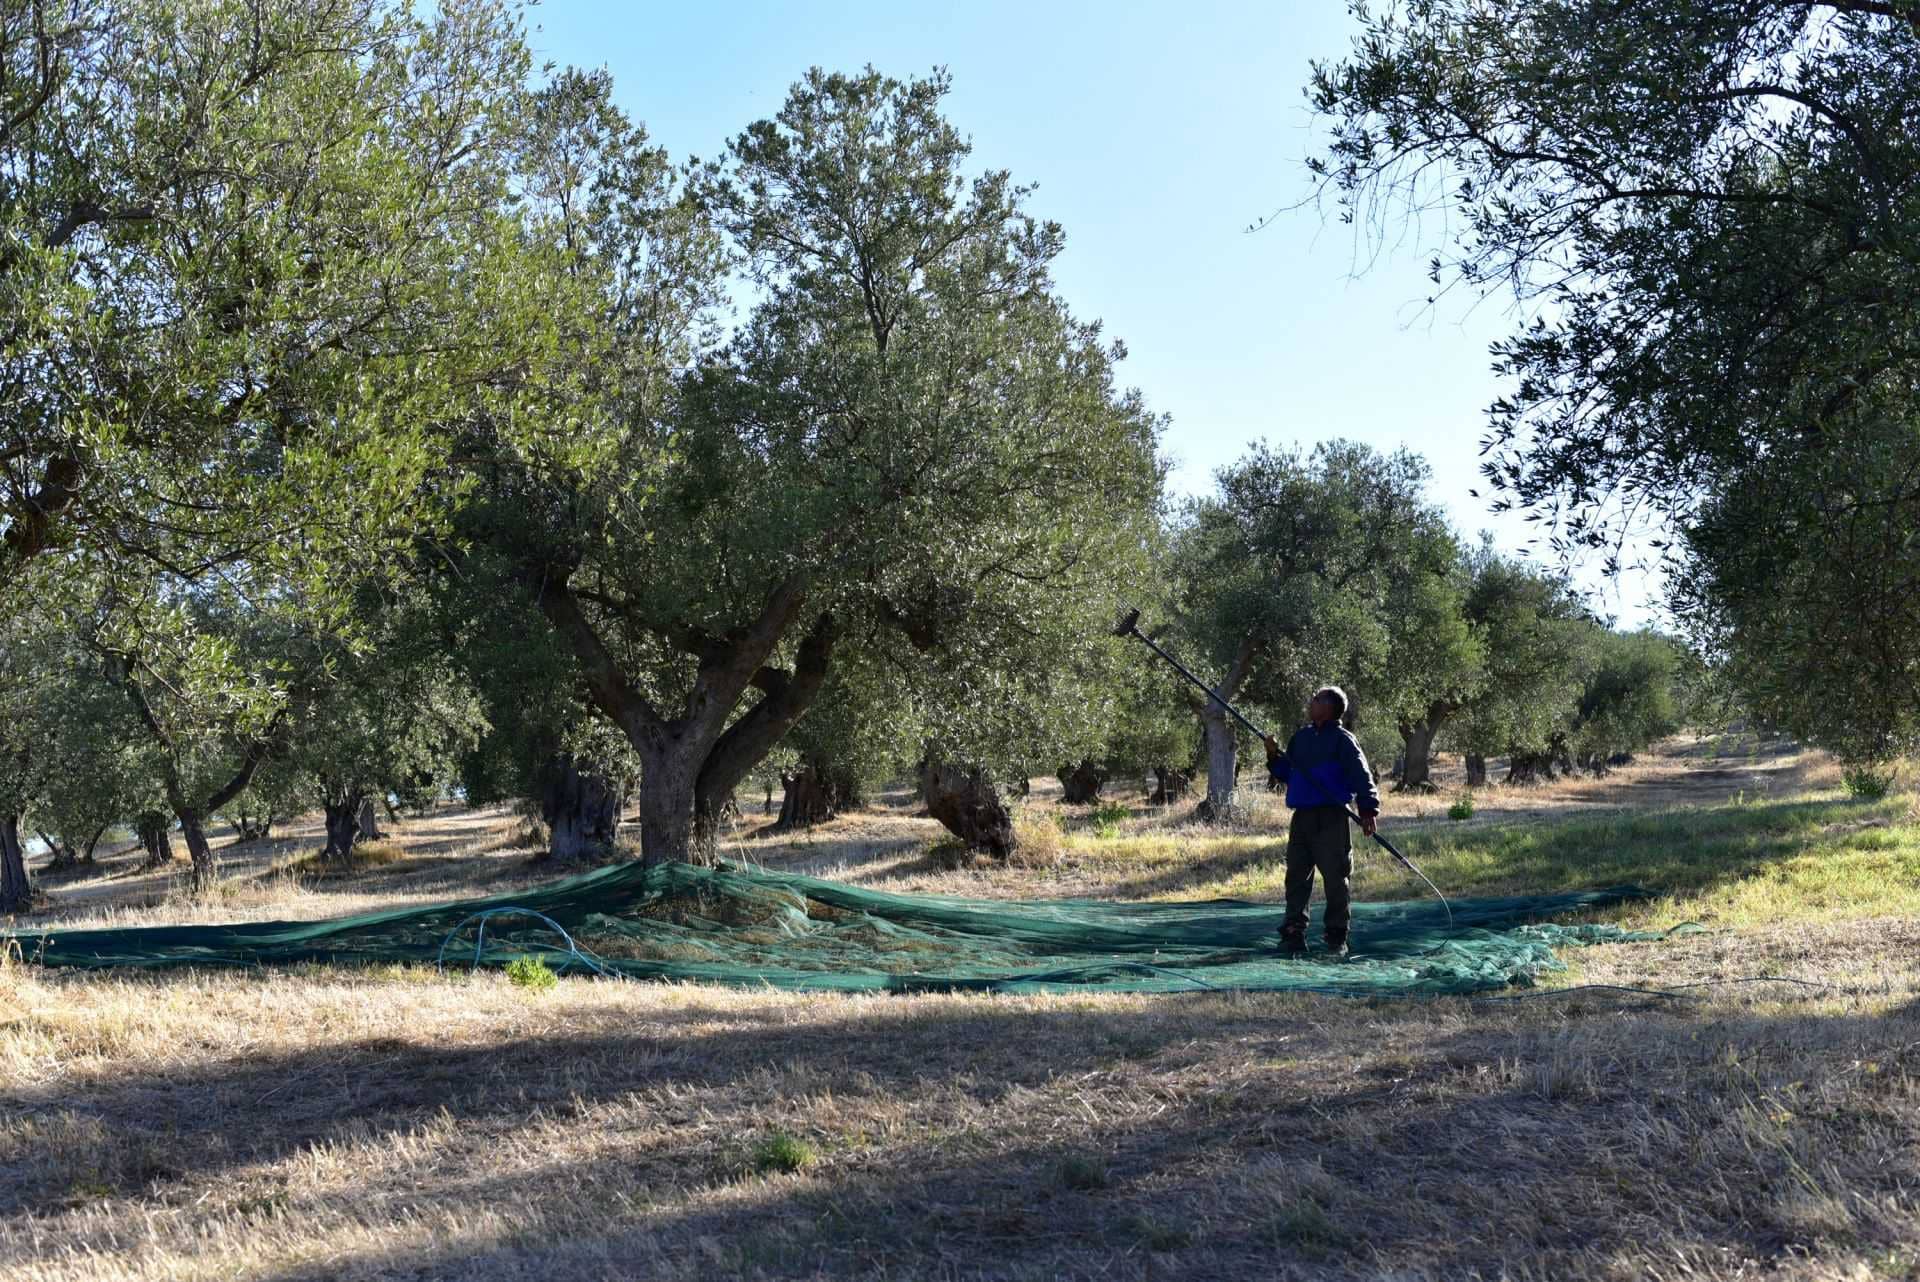 business-europe-production-social-farming-initiatives-in-italy-focus-on-environment-inclusion-olive-oil-times